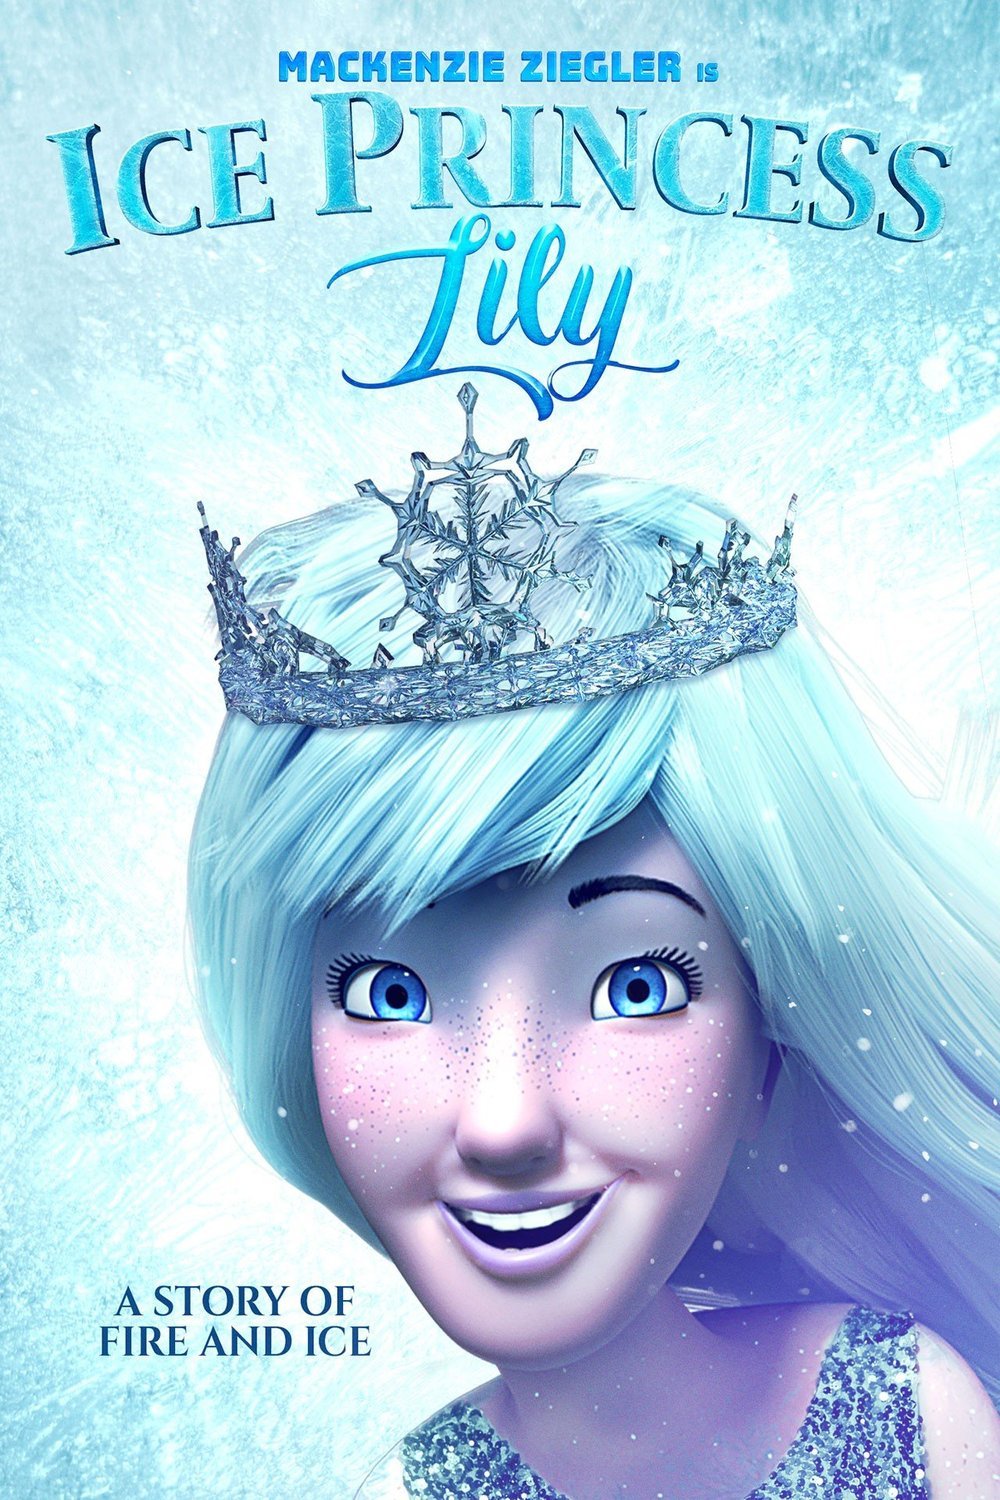 Poster of the movie Ice Princess Lily